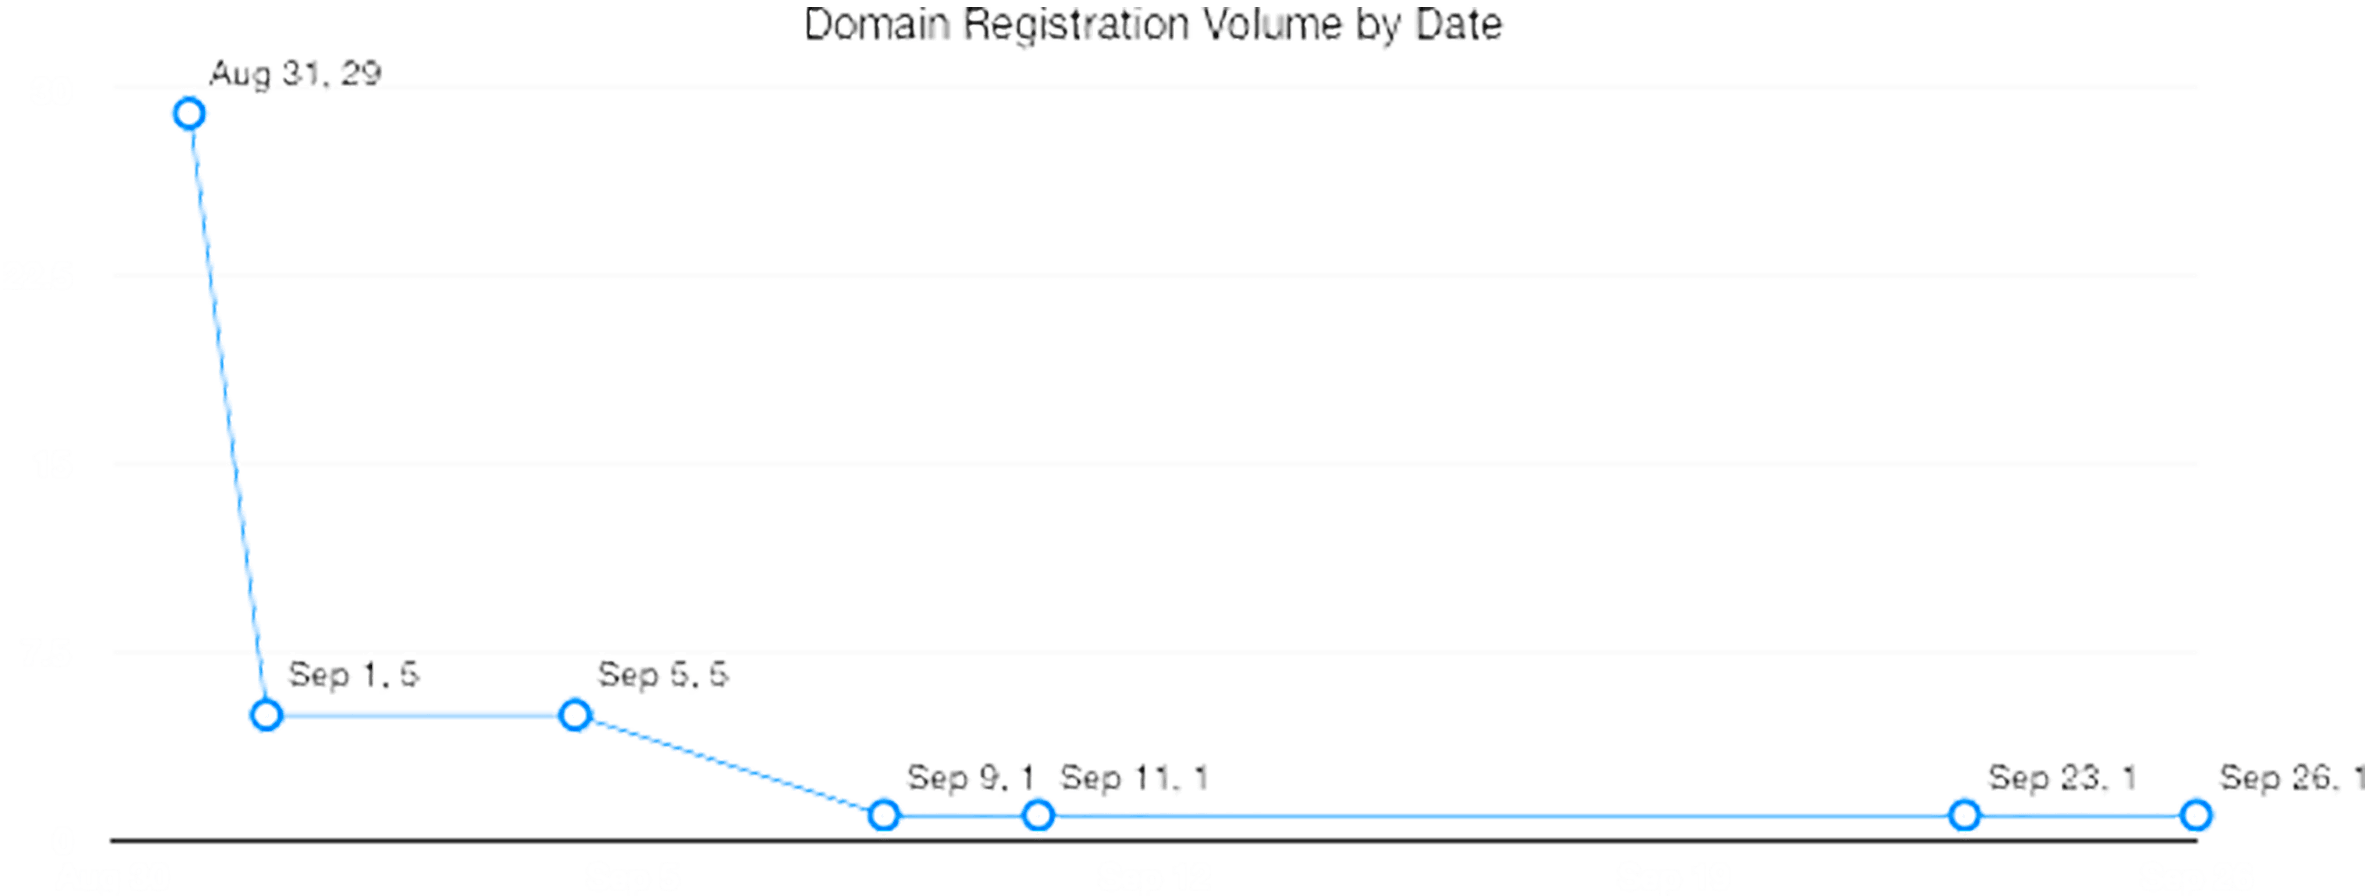 The following chart shows the number of domain registrations by date of creation